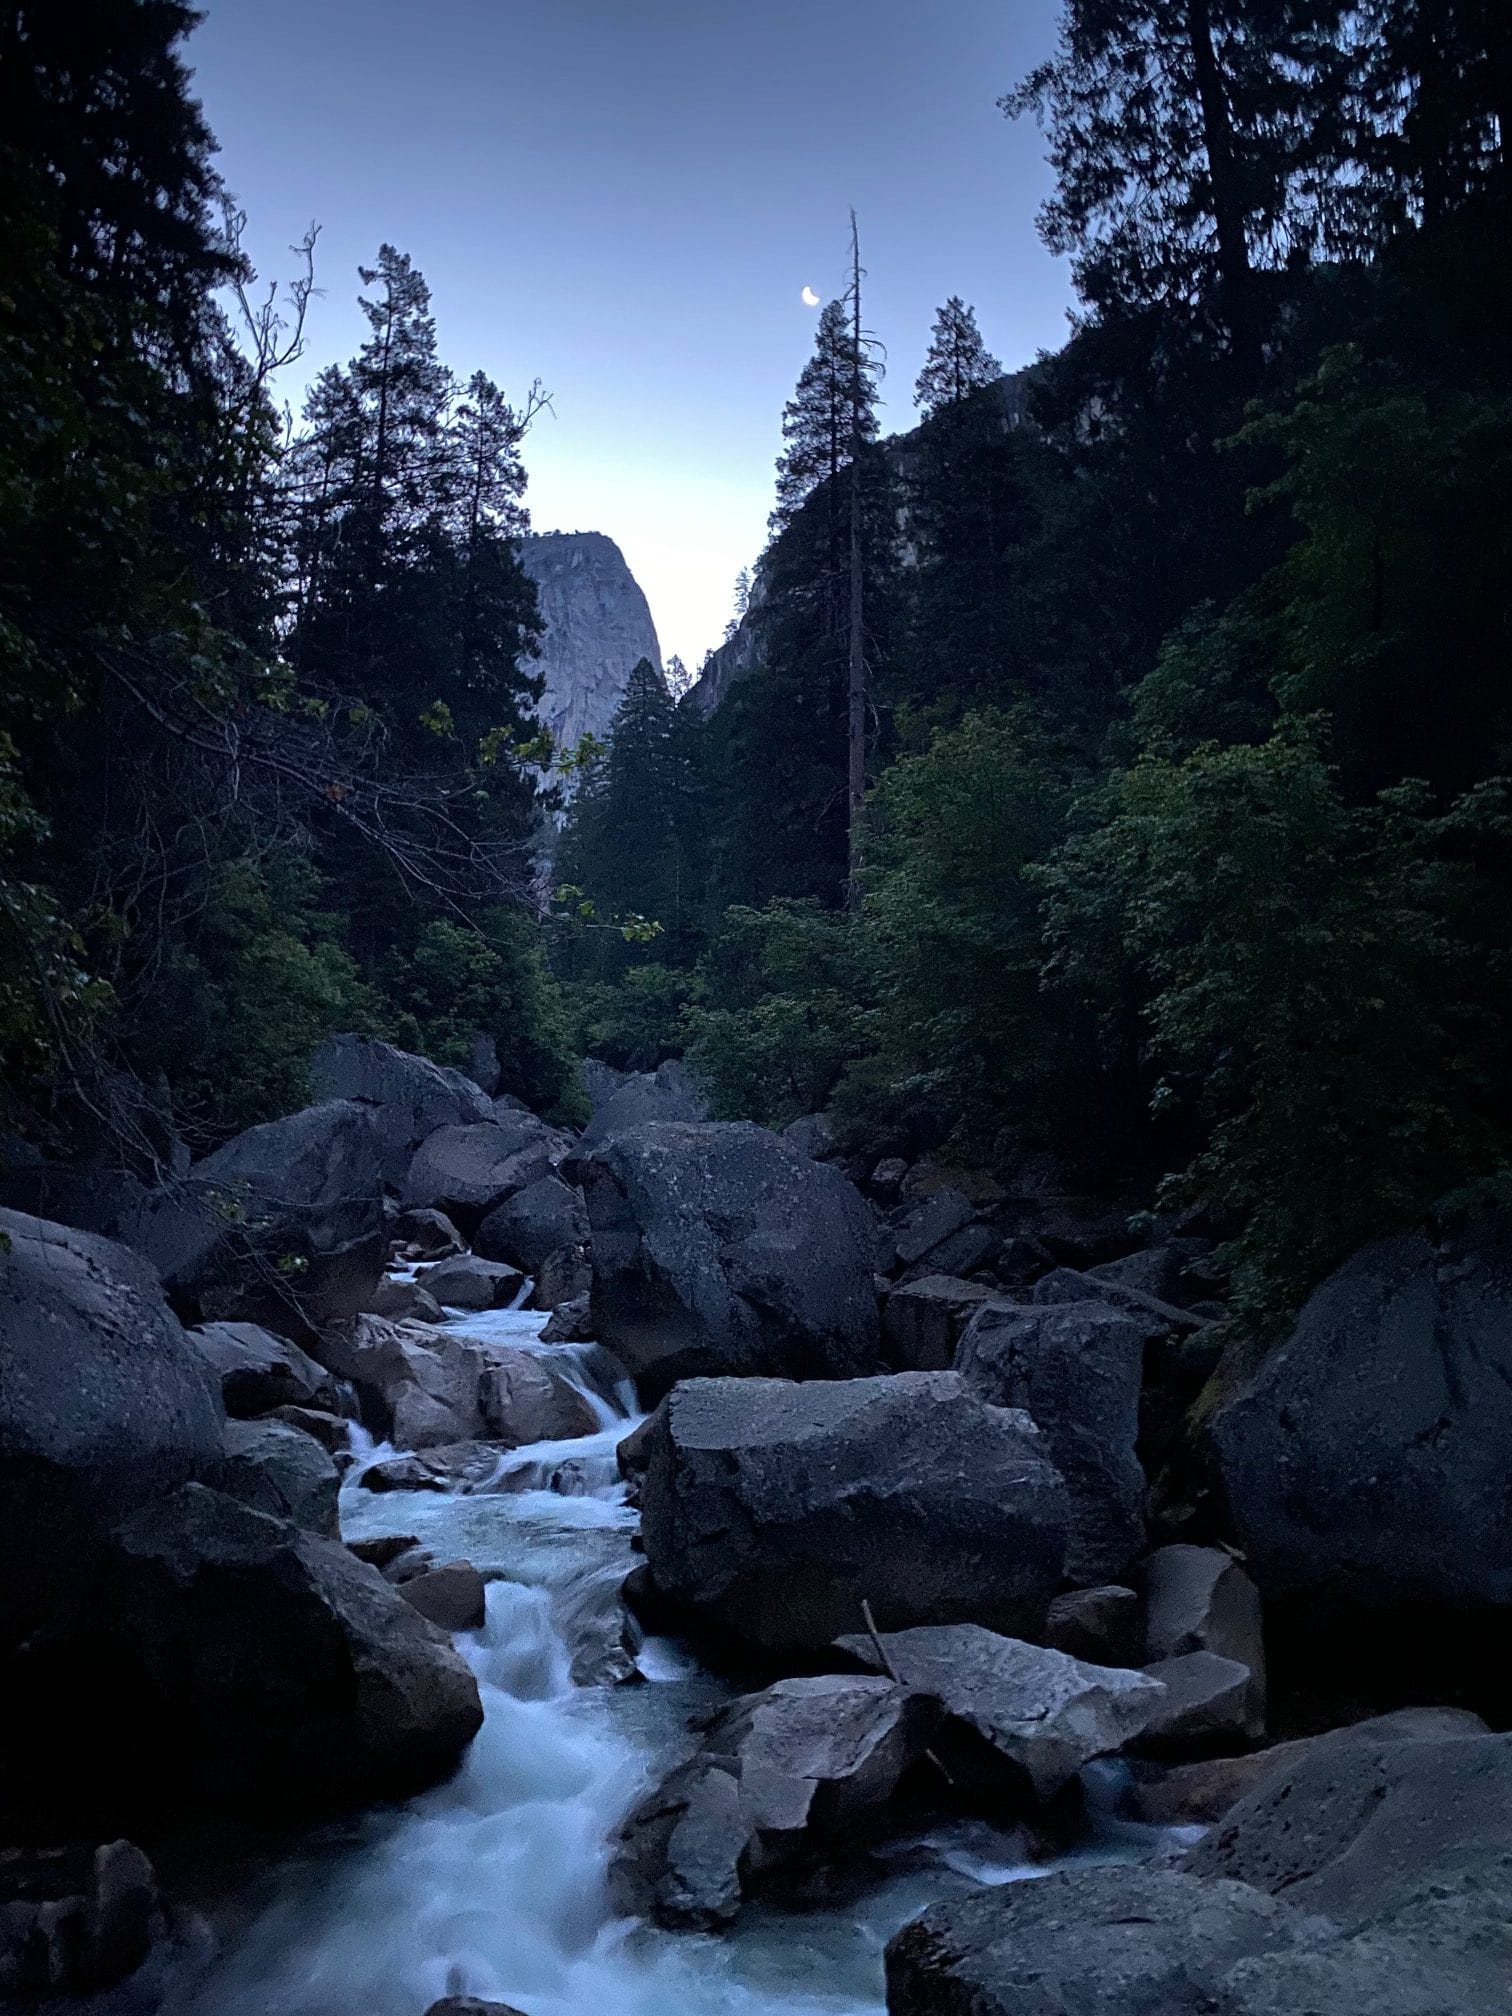 You begin your hike by climbing up the Mist Trail past the Vernal and Nevada Falls.